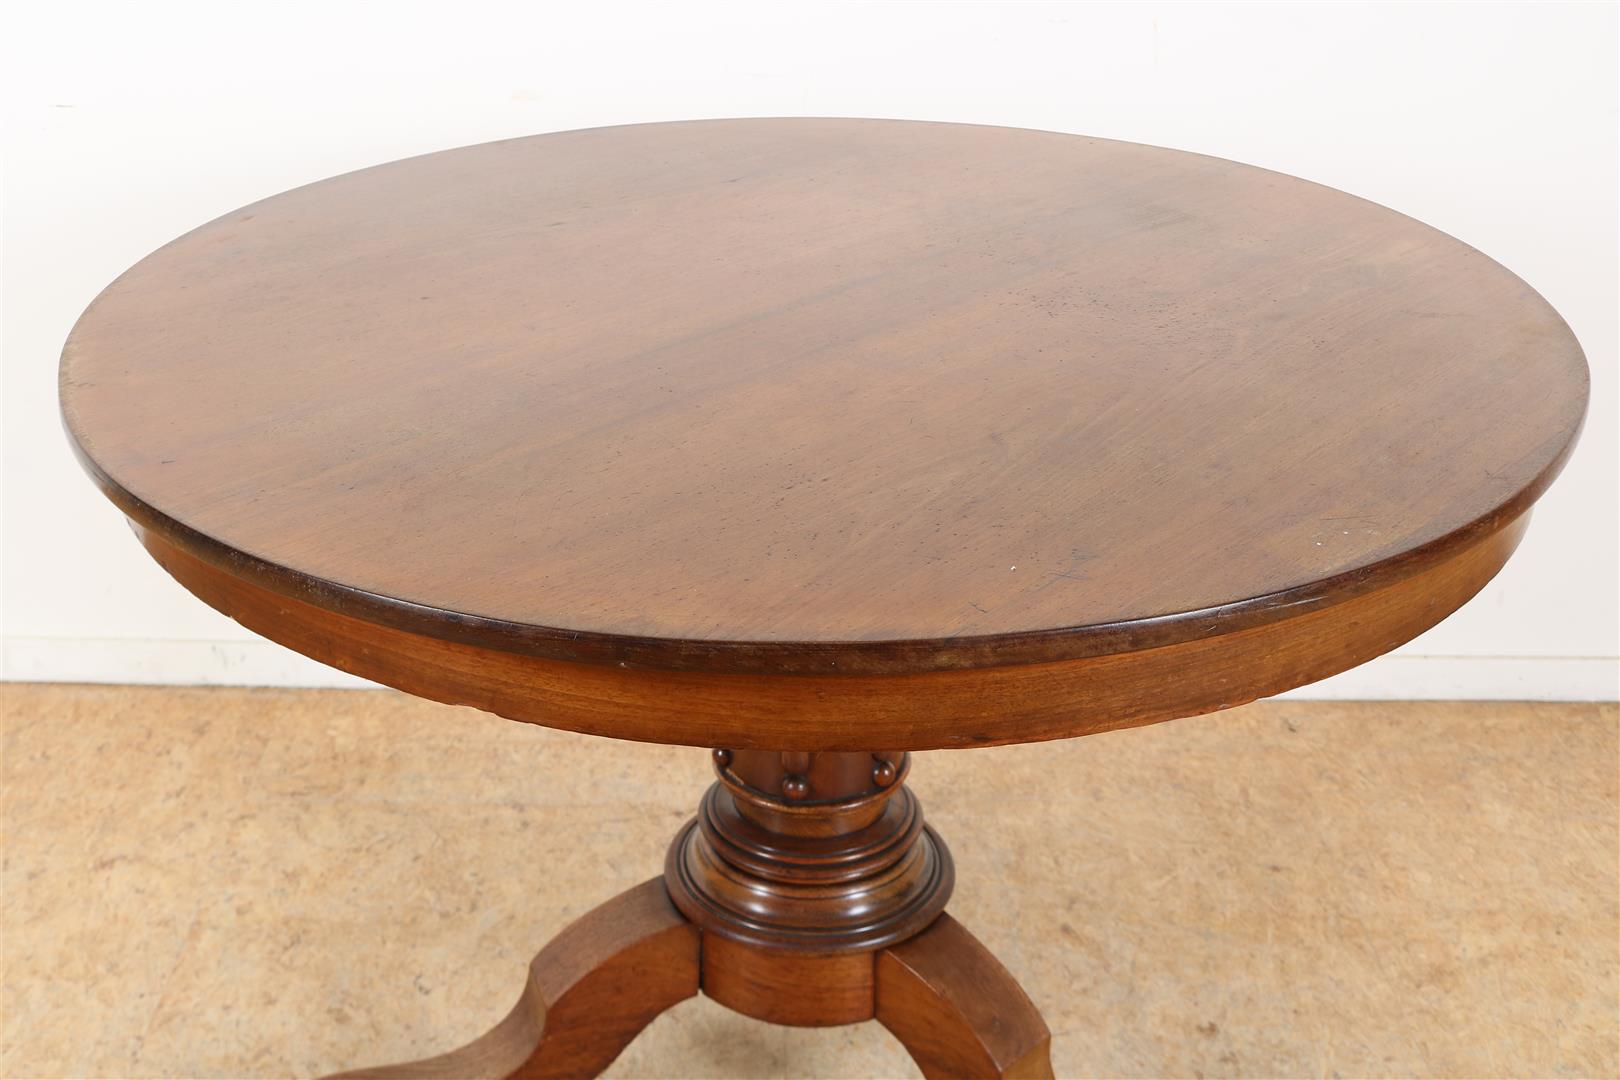 Mahogany Biedermeier round table on column leg ending in 3 branches, 19th century, 76 x 107 cm. - Image 2 of 3